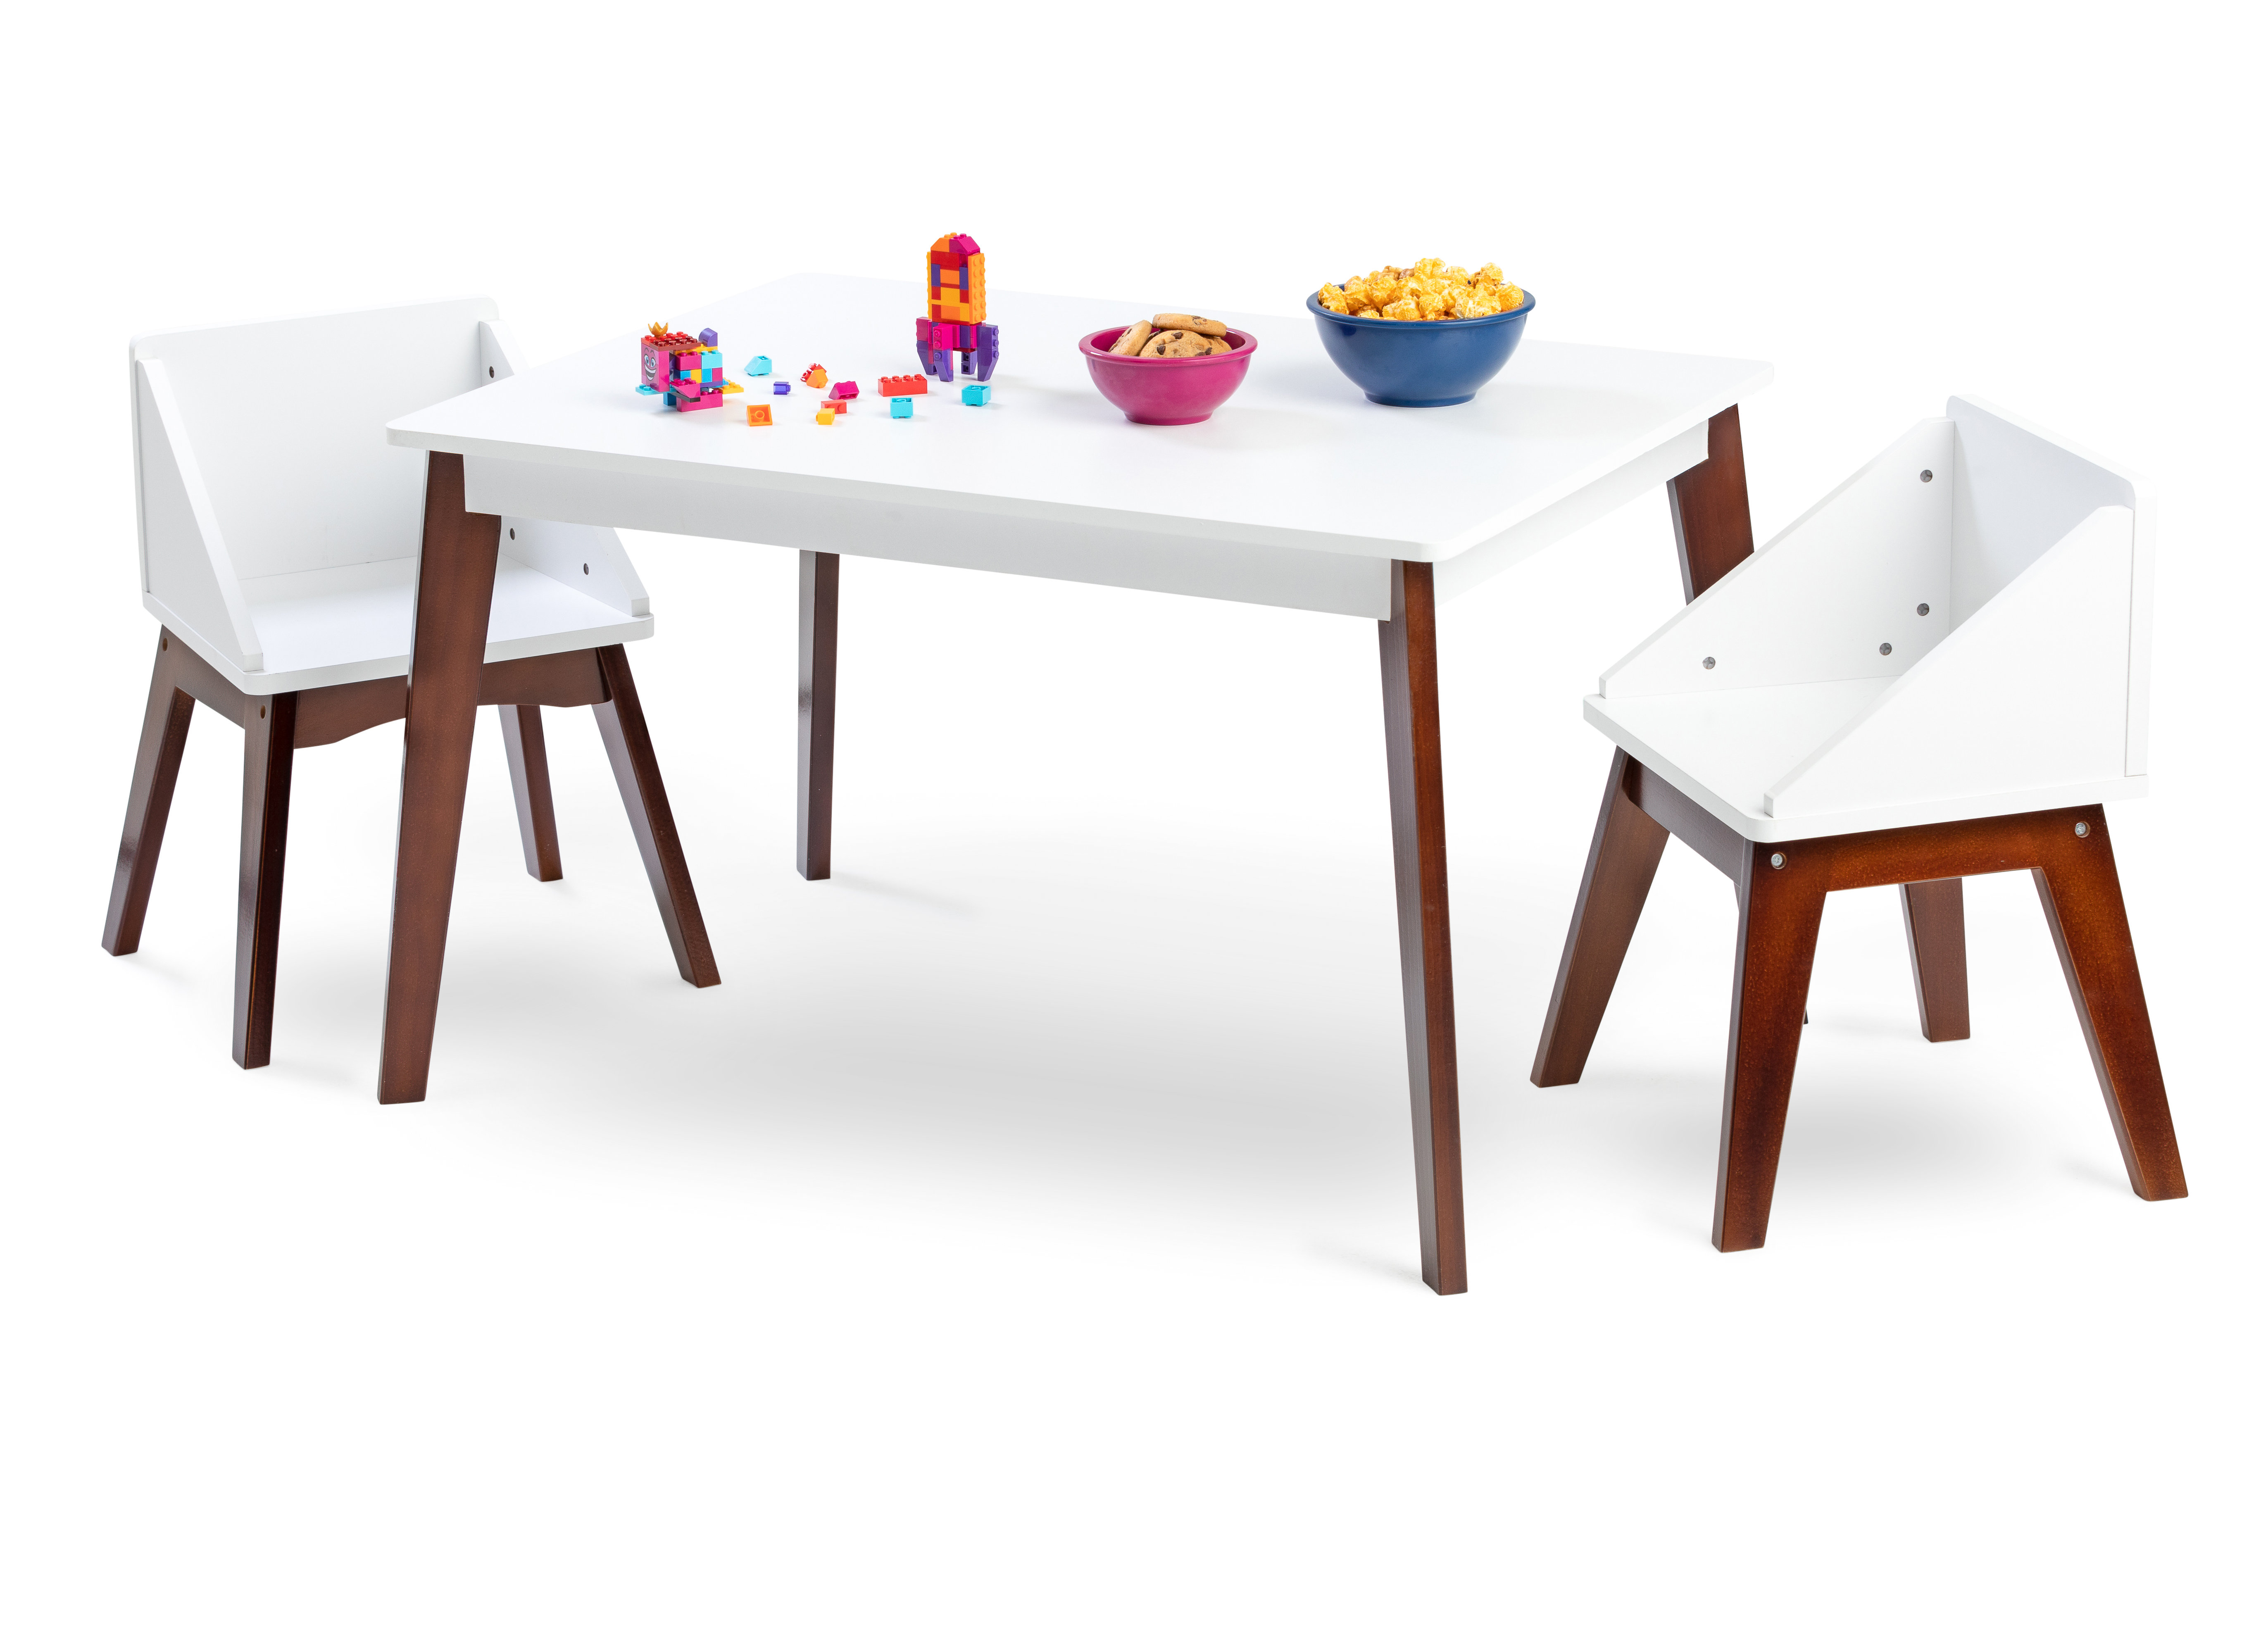 childrens small wooden table and chairs